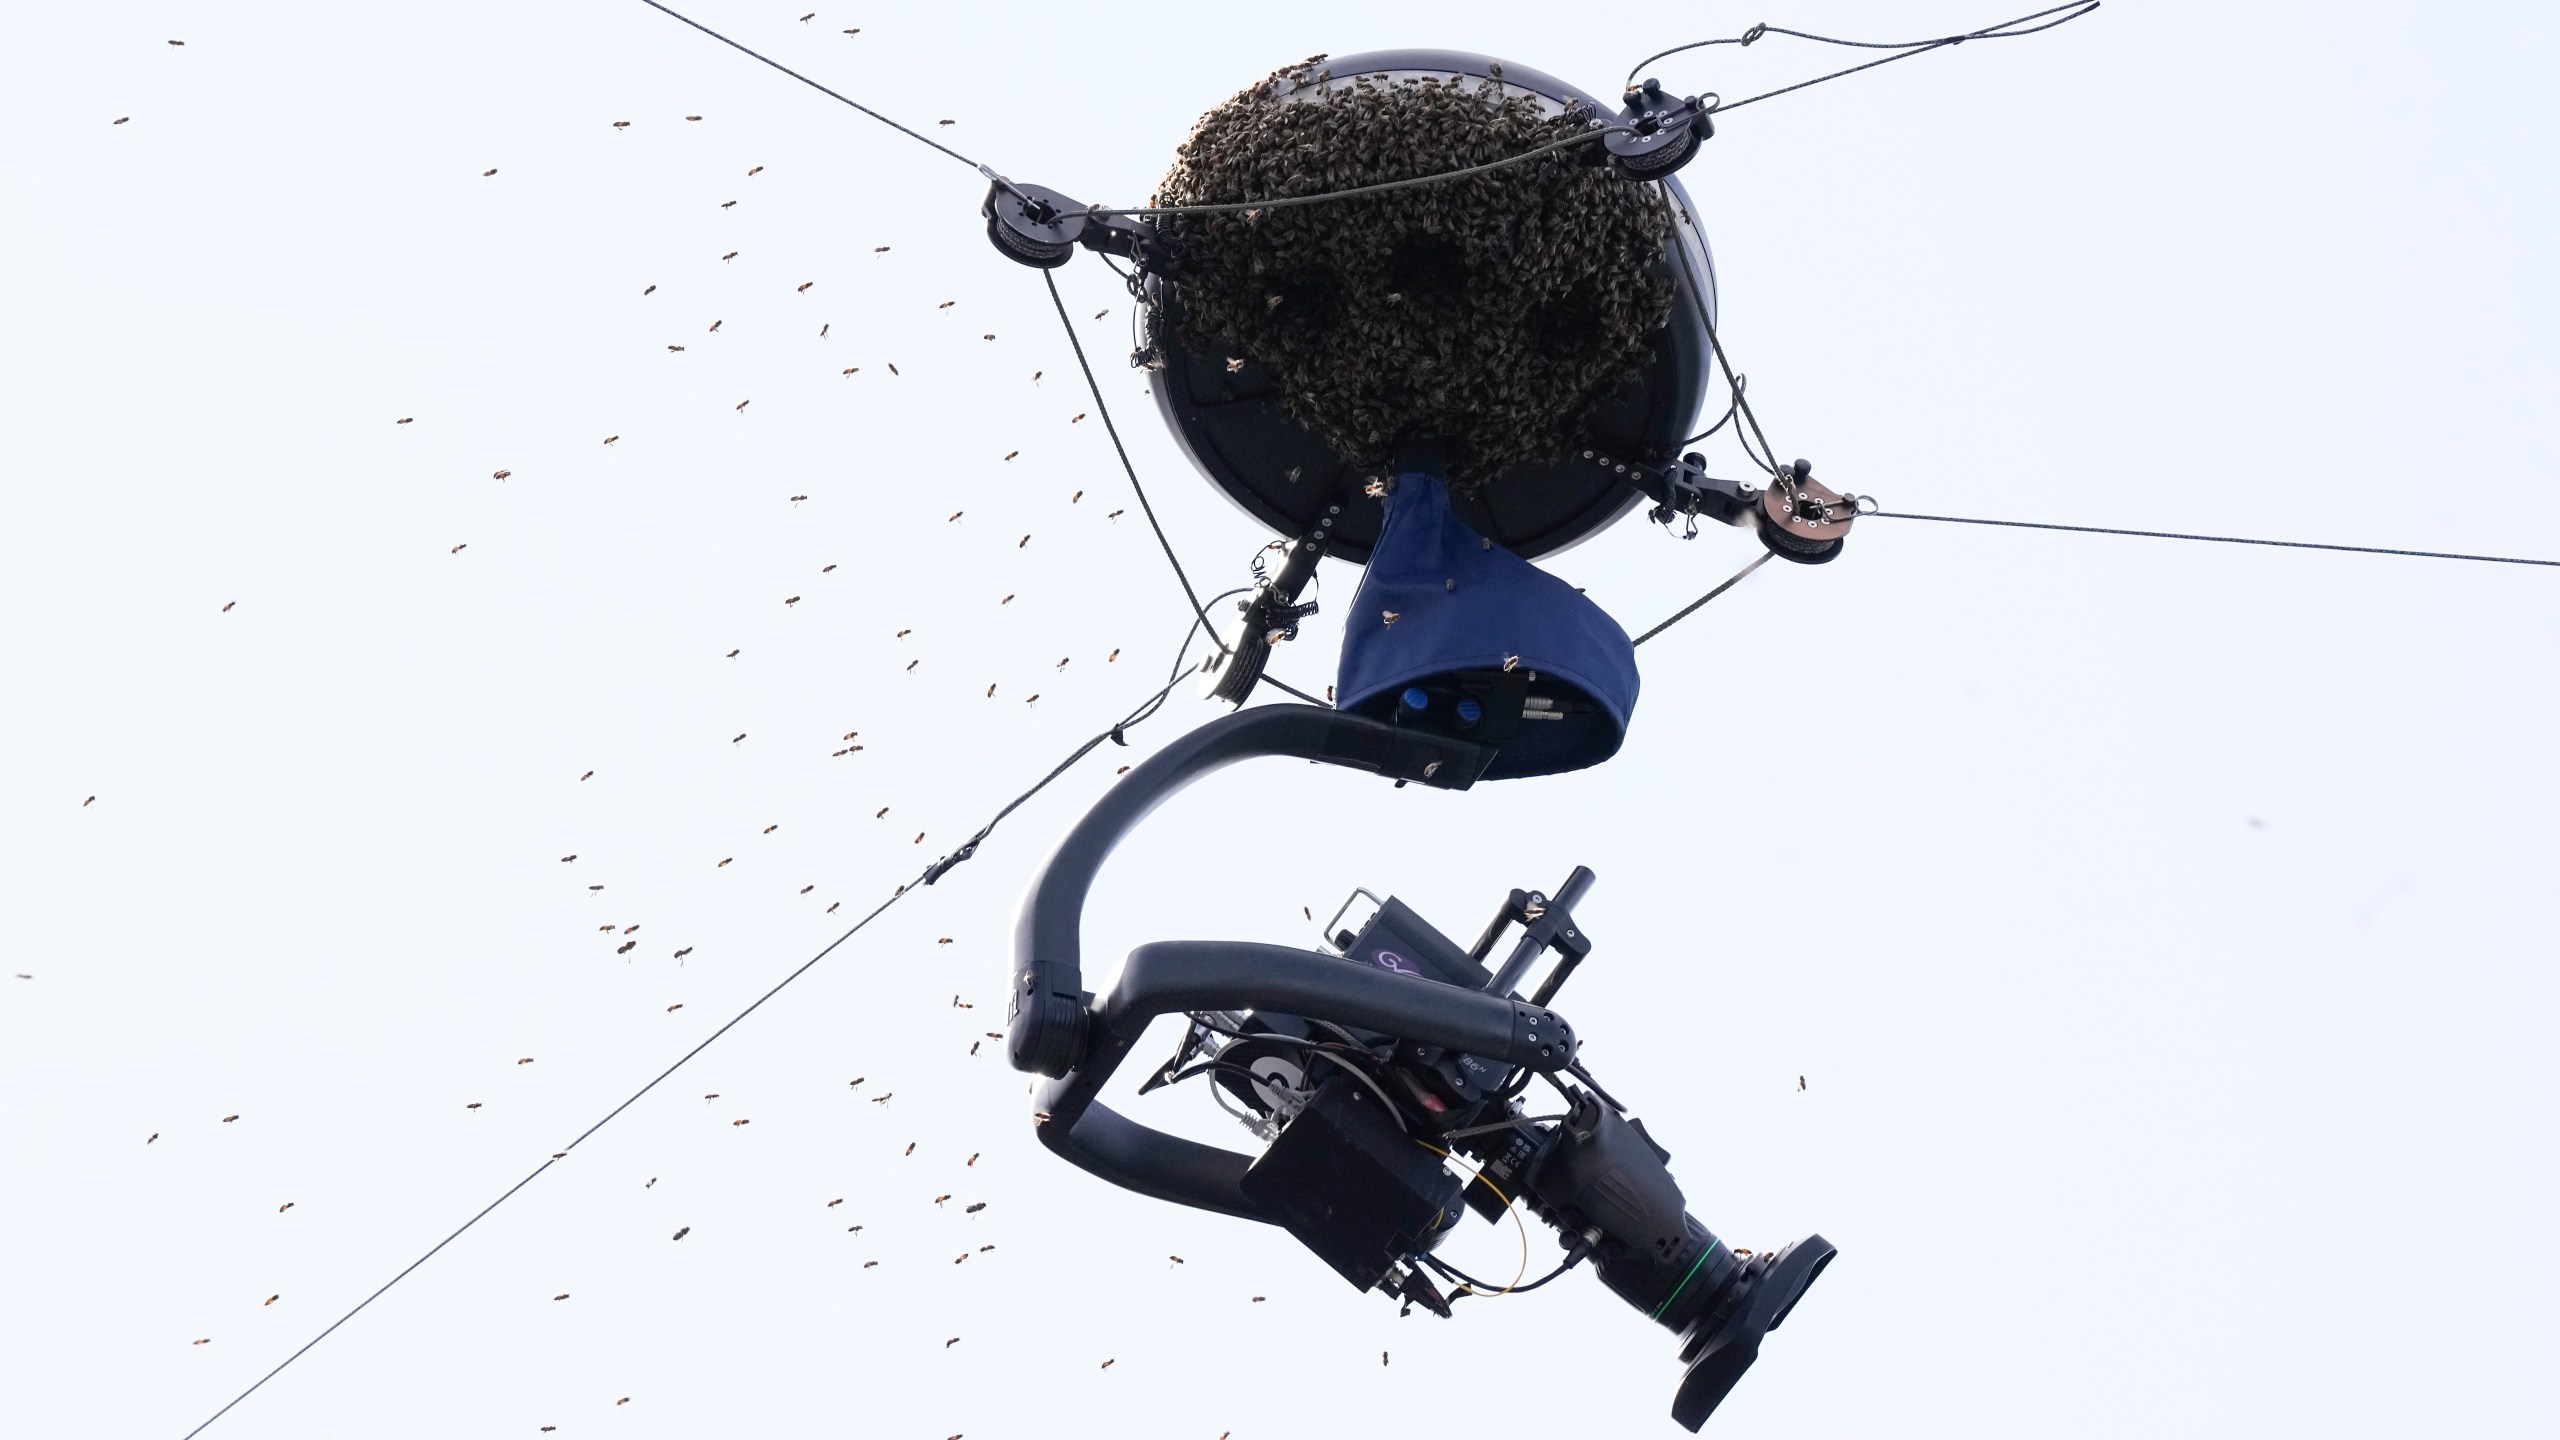 Bees swarm around a camera during a quarterfinal match at the BNP Paribas Open tennis tournament, Thursday, March 14, 2024, in Indian Wells, Calif. (AP Photo/Mark J. Terrill)